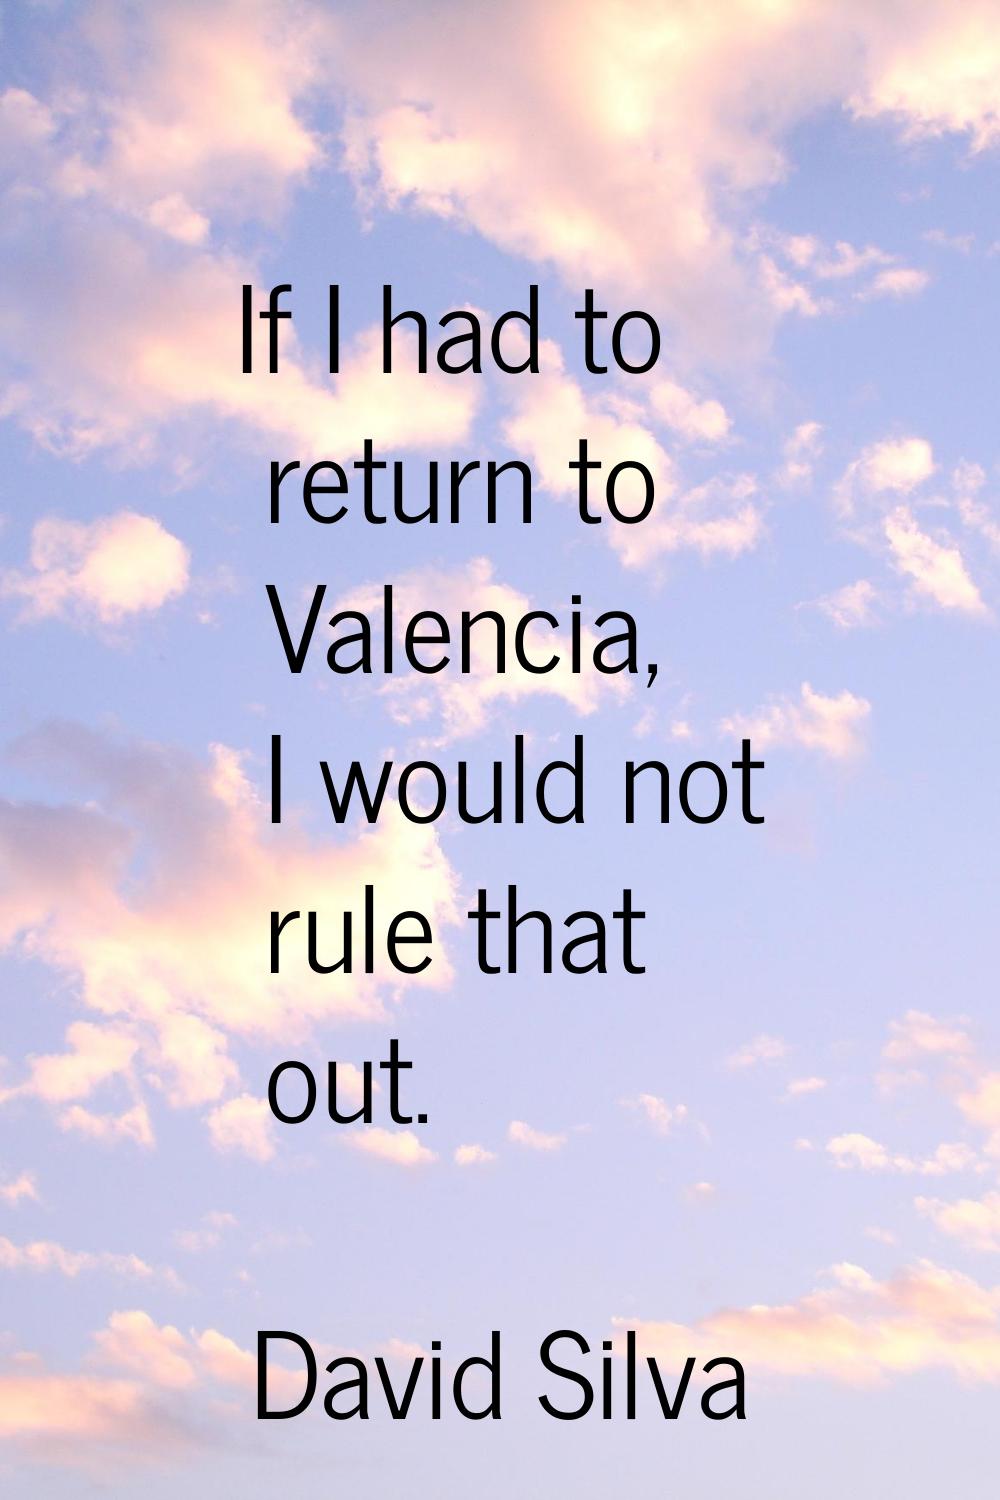 If I had to return to Valencia, I would not rule that out.